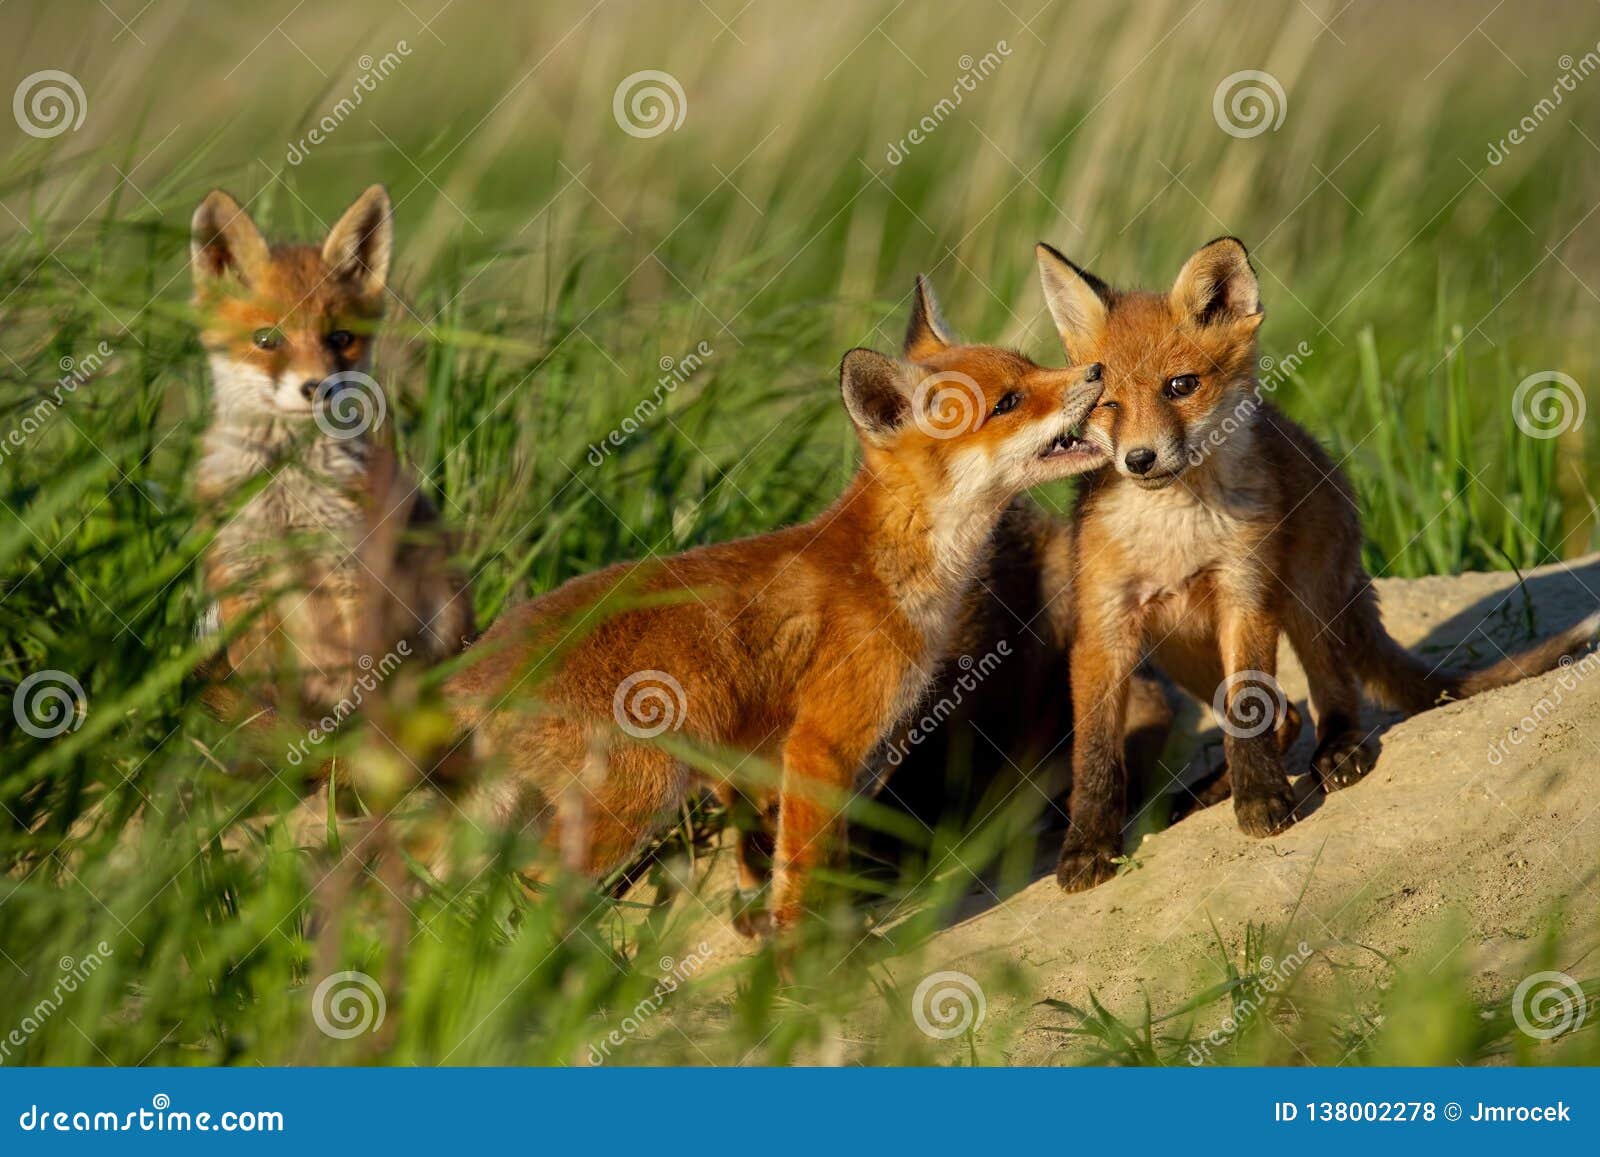 red fox, vulpes vulpes, small young cubs near den playing.